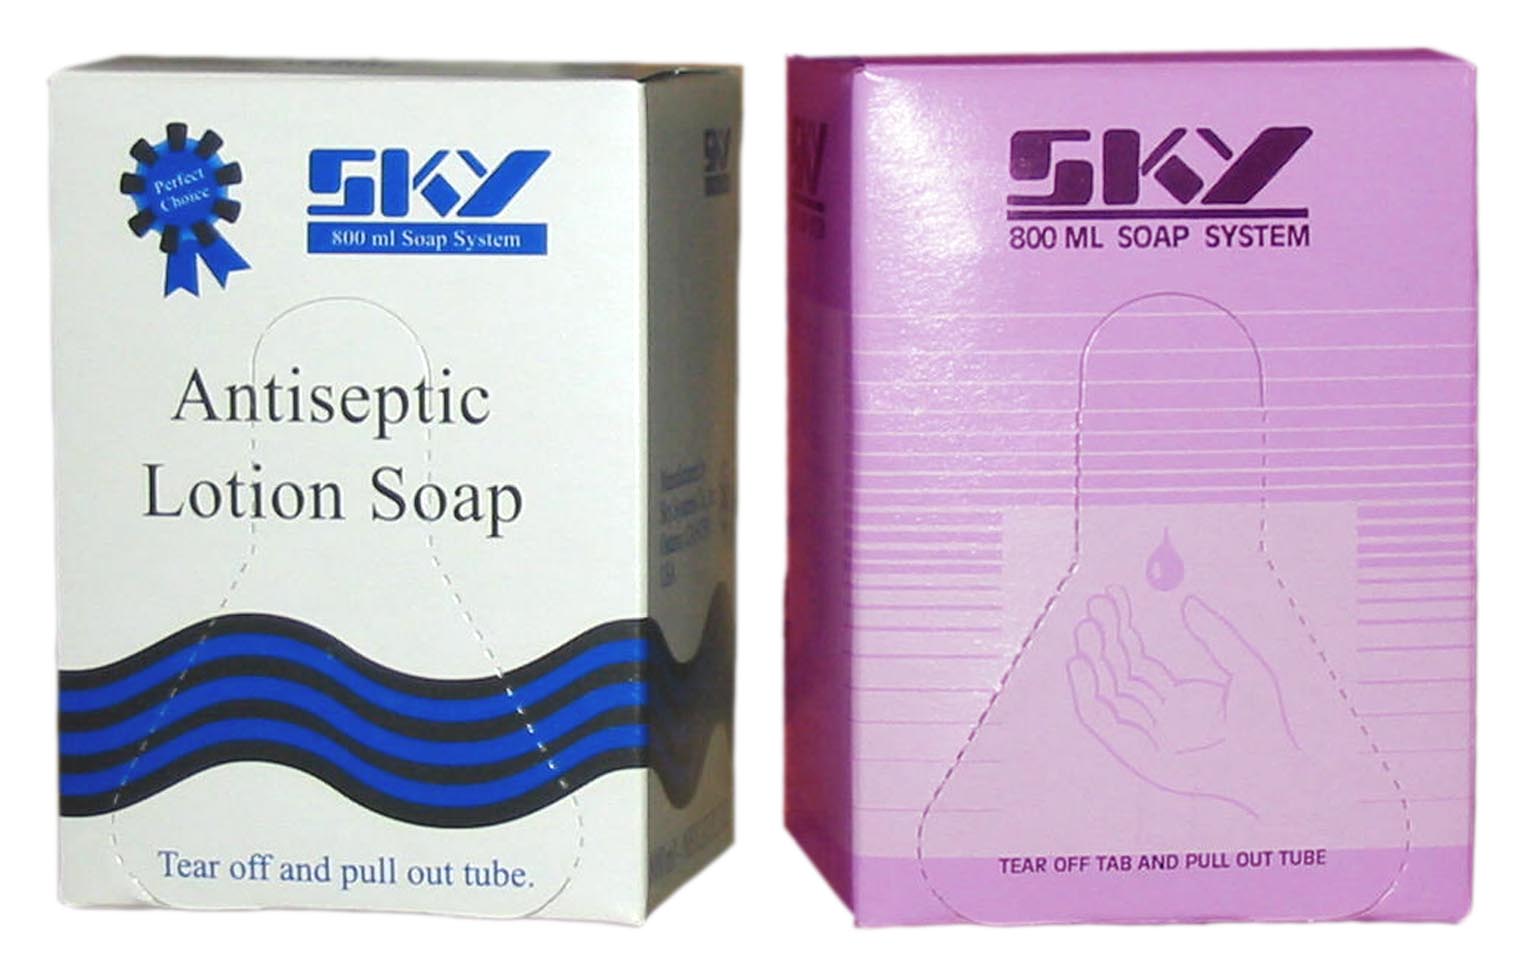 SKY Antiseptic Soap with PCMX 800 ml, case of 12 boxes